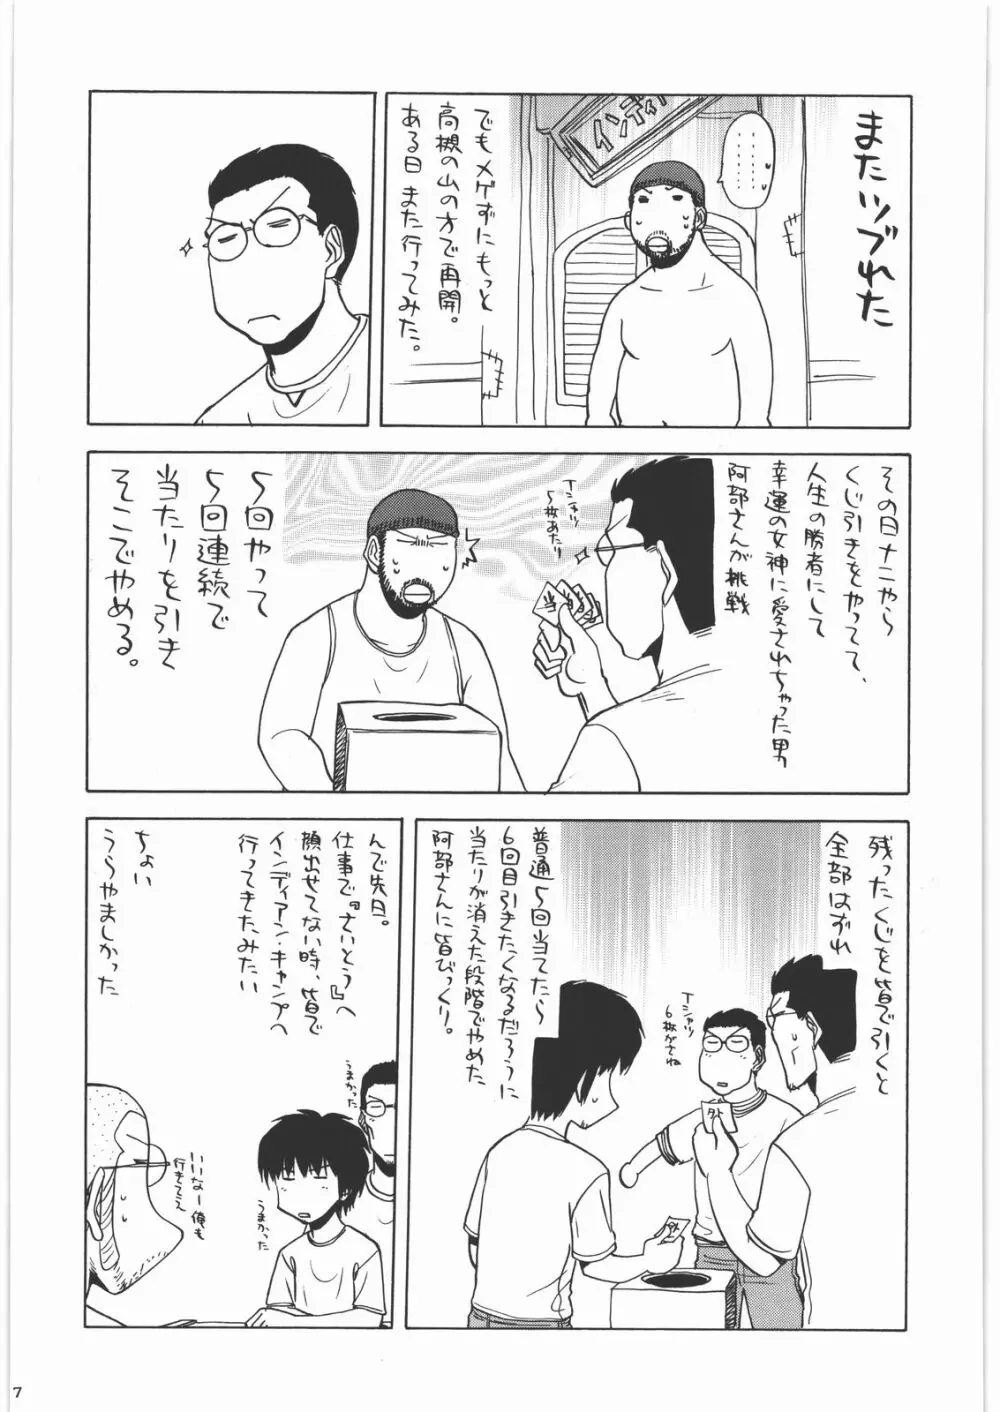 甲冑通信 弐之號 Page.6